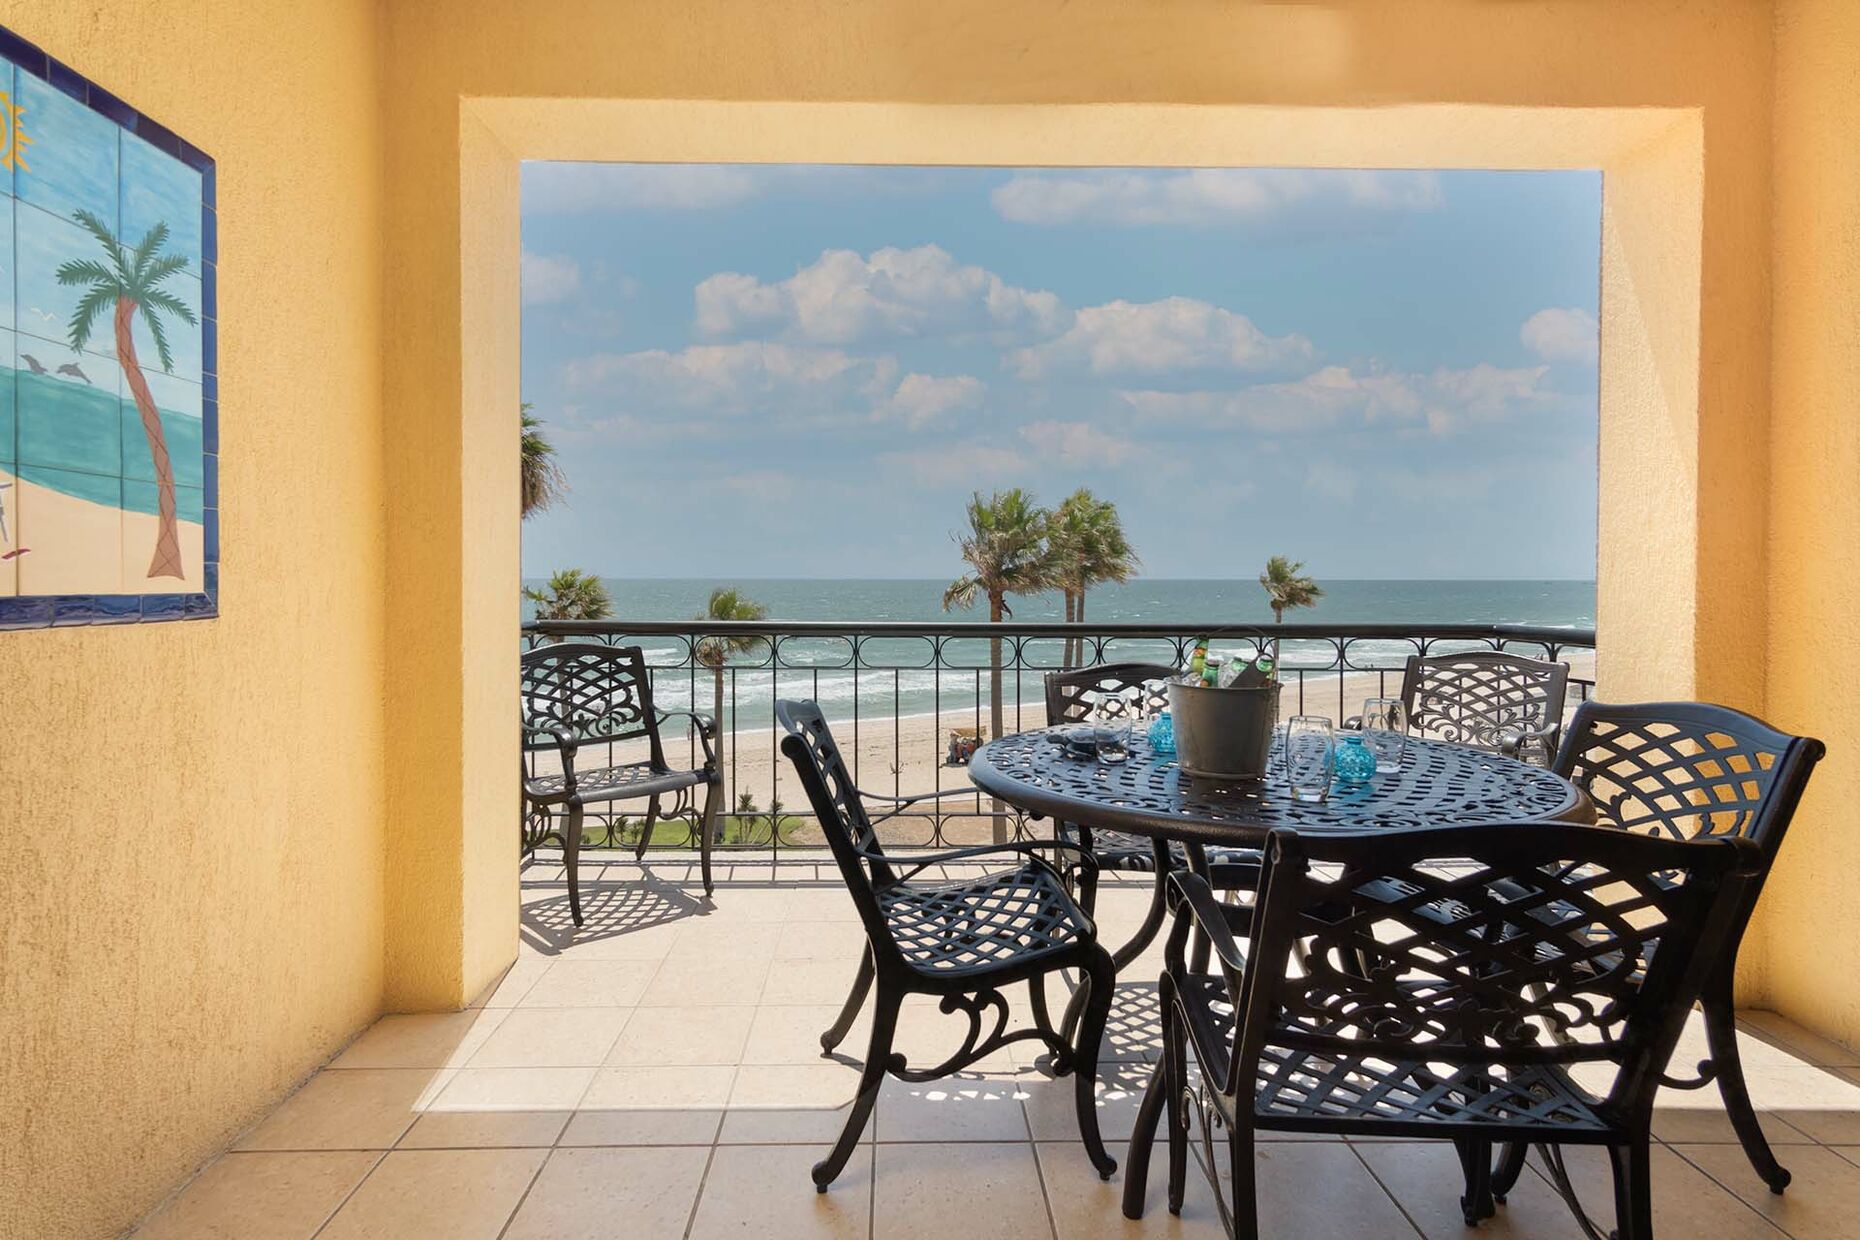 The patio puts you above the waves, enjoying life!